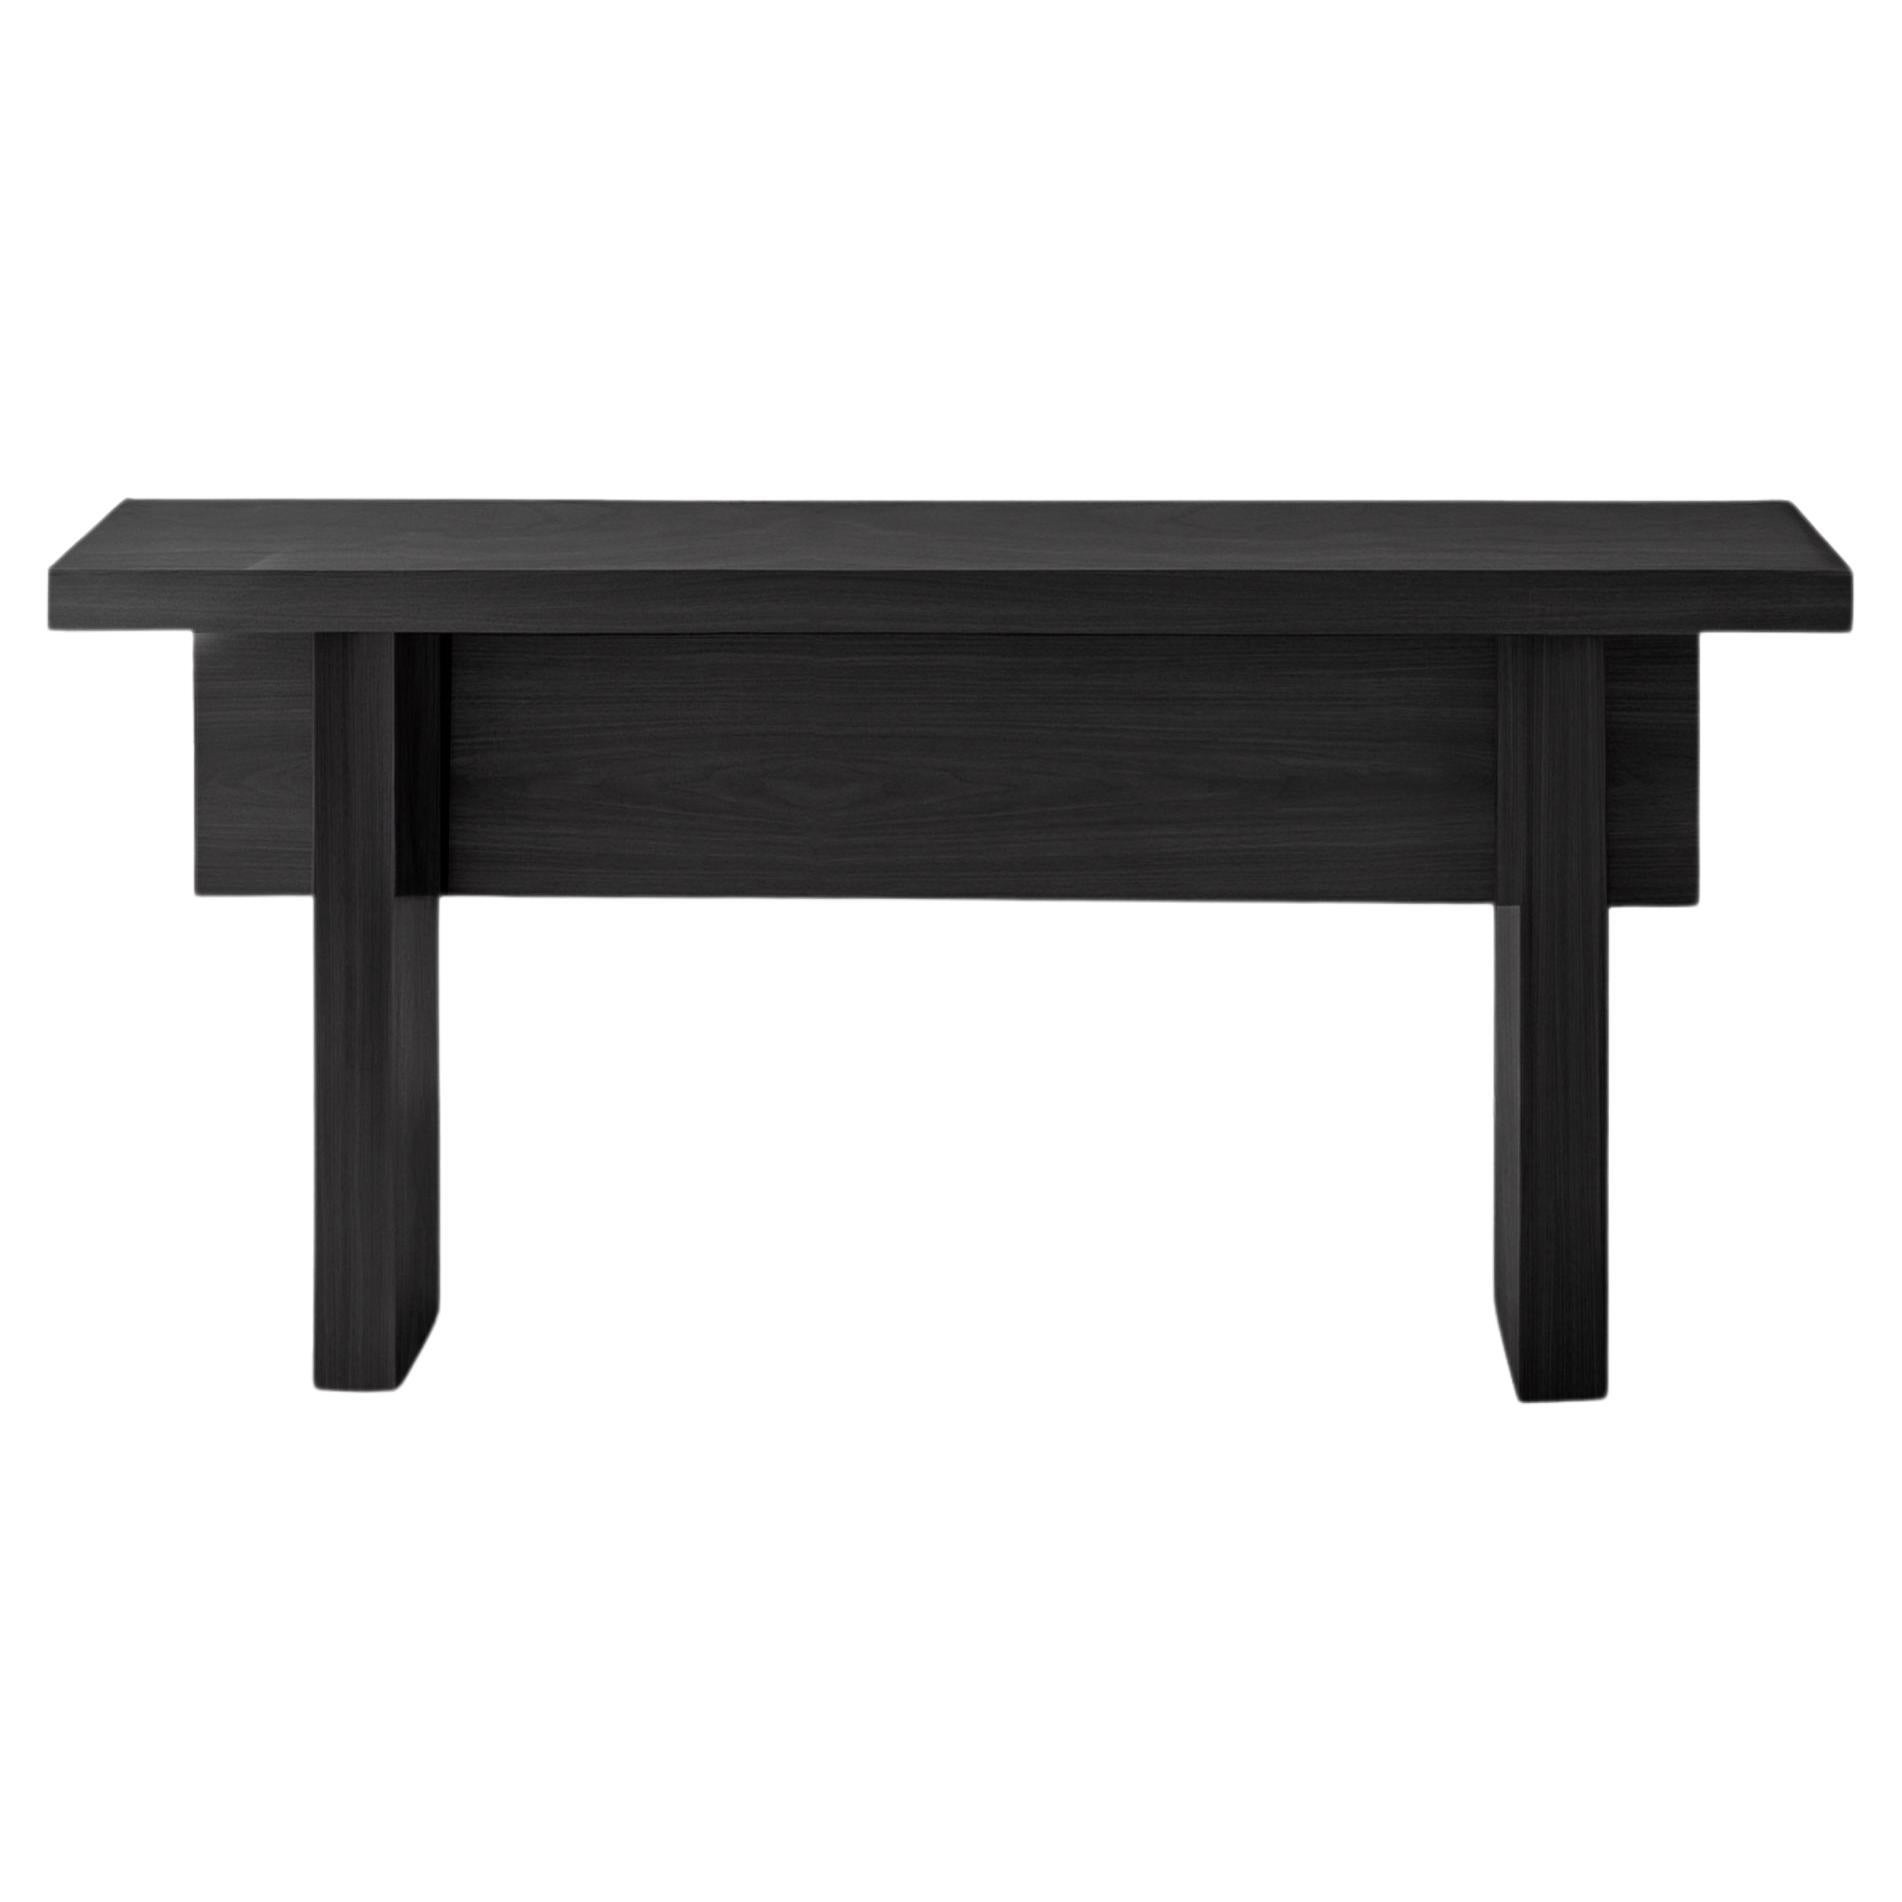 Minimal Console Table, Sideboard Made of Black Tinted Oak Wood, Narrow Console